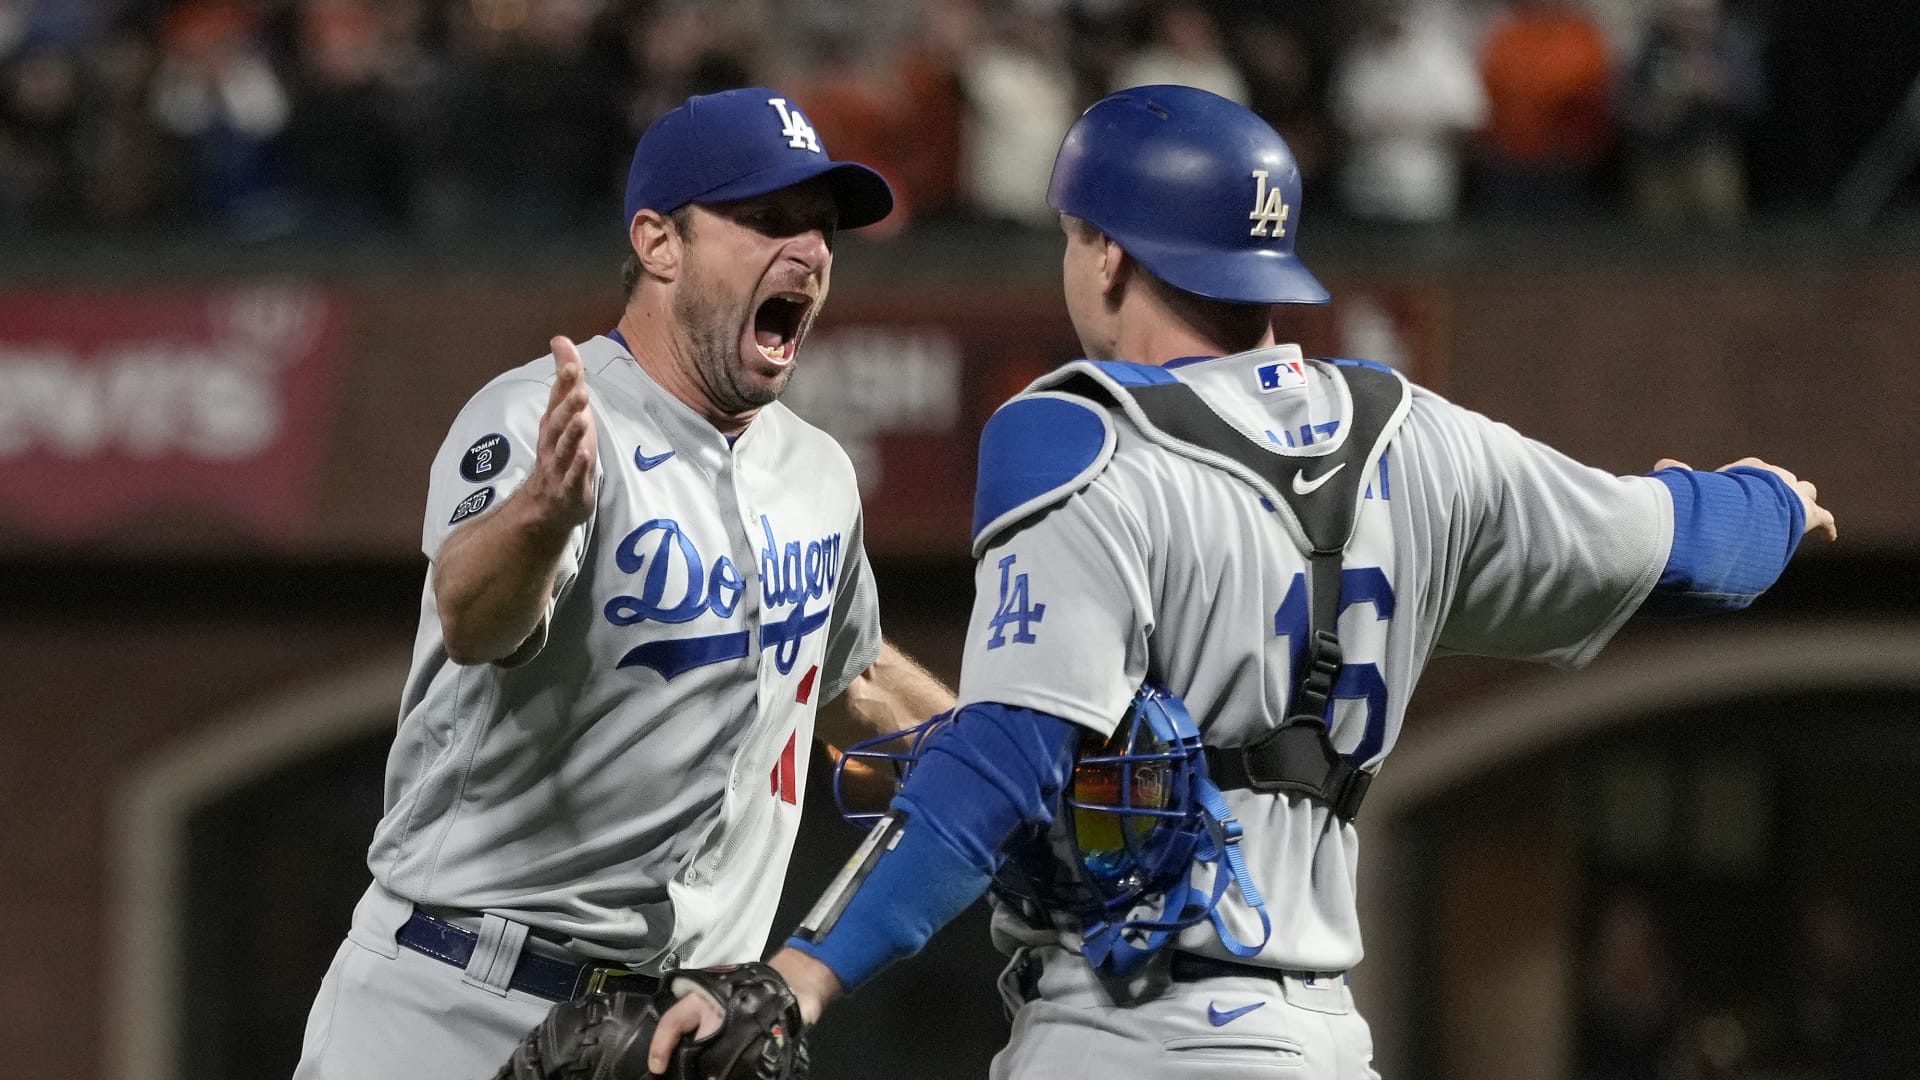 Max Scherzer, left, and Will Smith of the Los Angeles Dodgers celebrate after beating the San Francisco Giants 2-1 in game 5 of the National League Division Series at Oracle Park on October 14, 2021 in San Francisco, California.